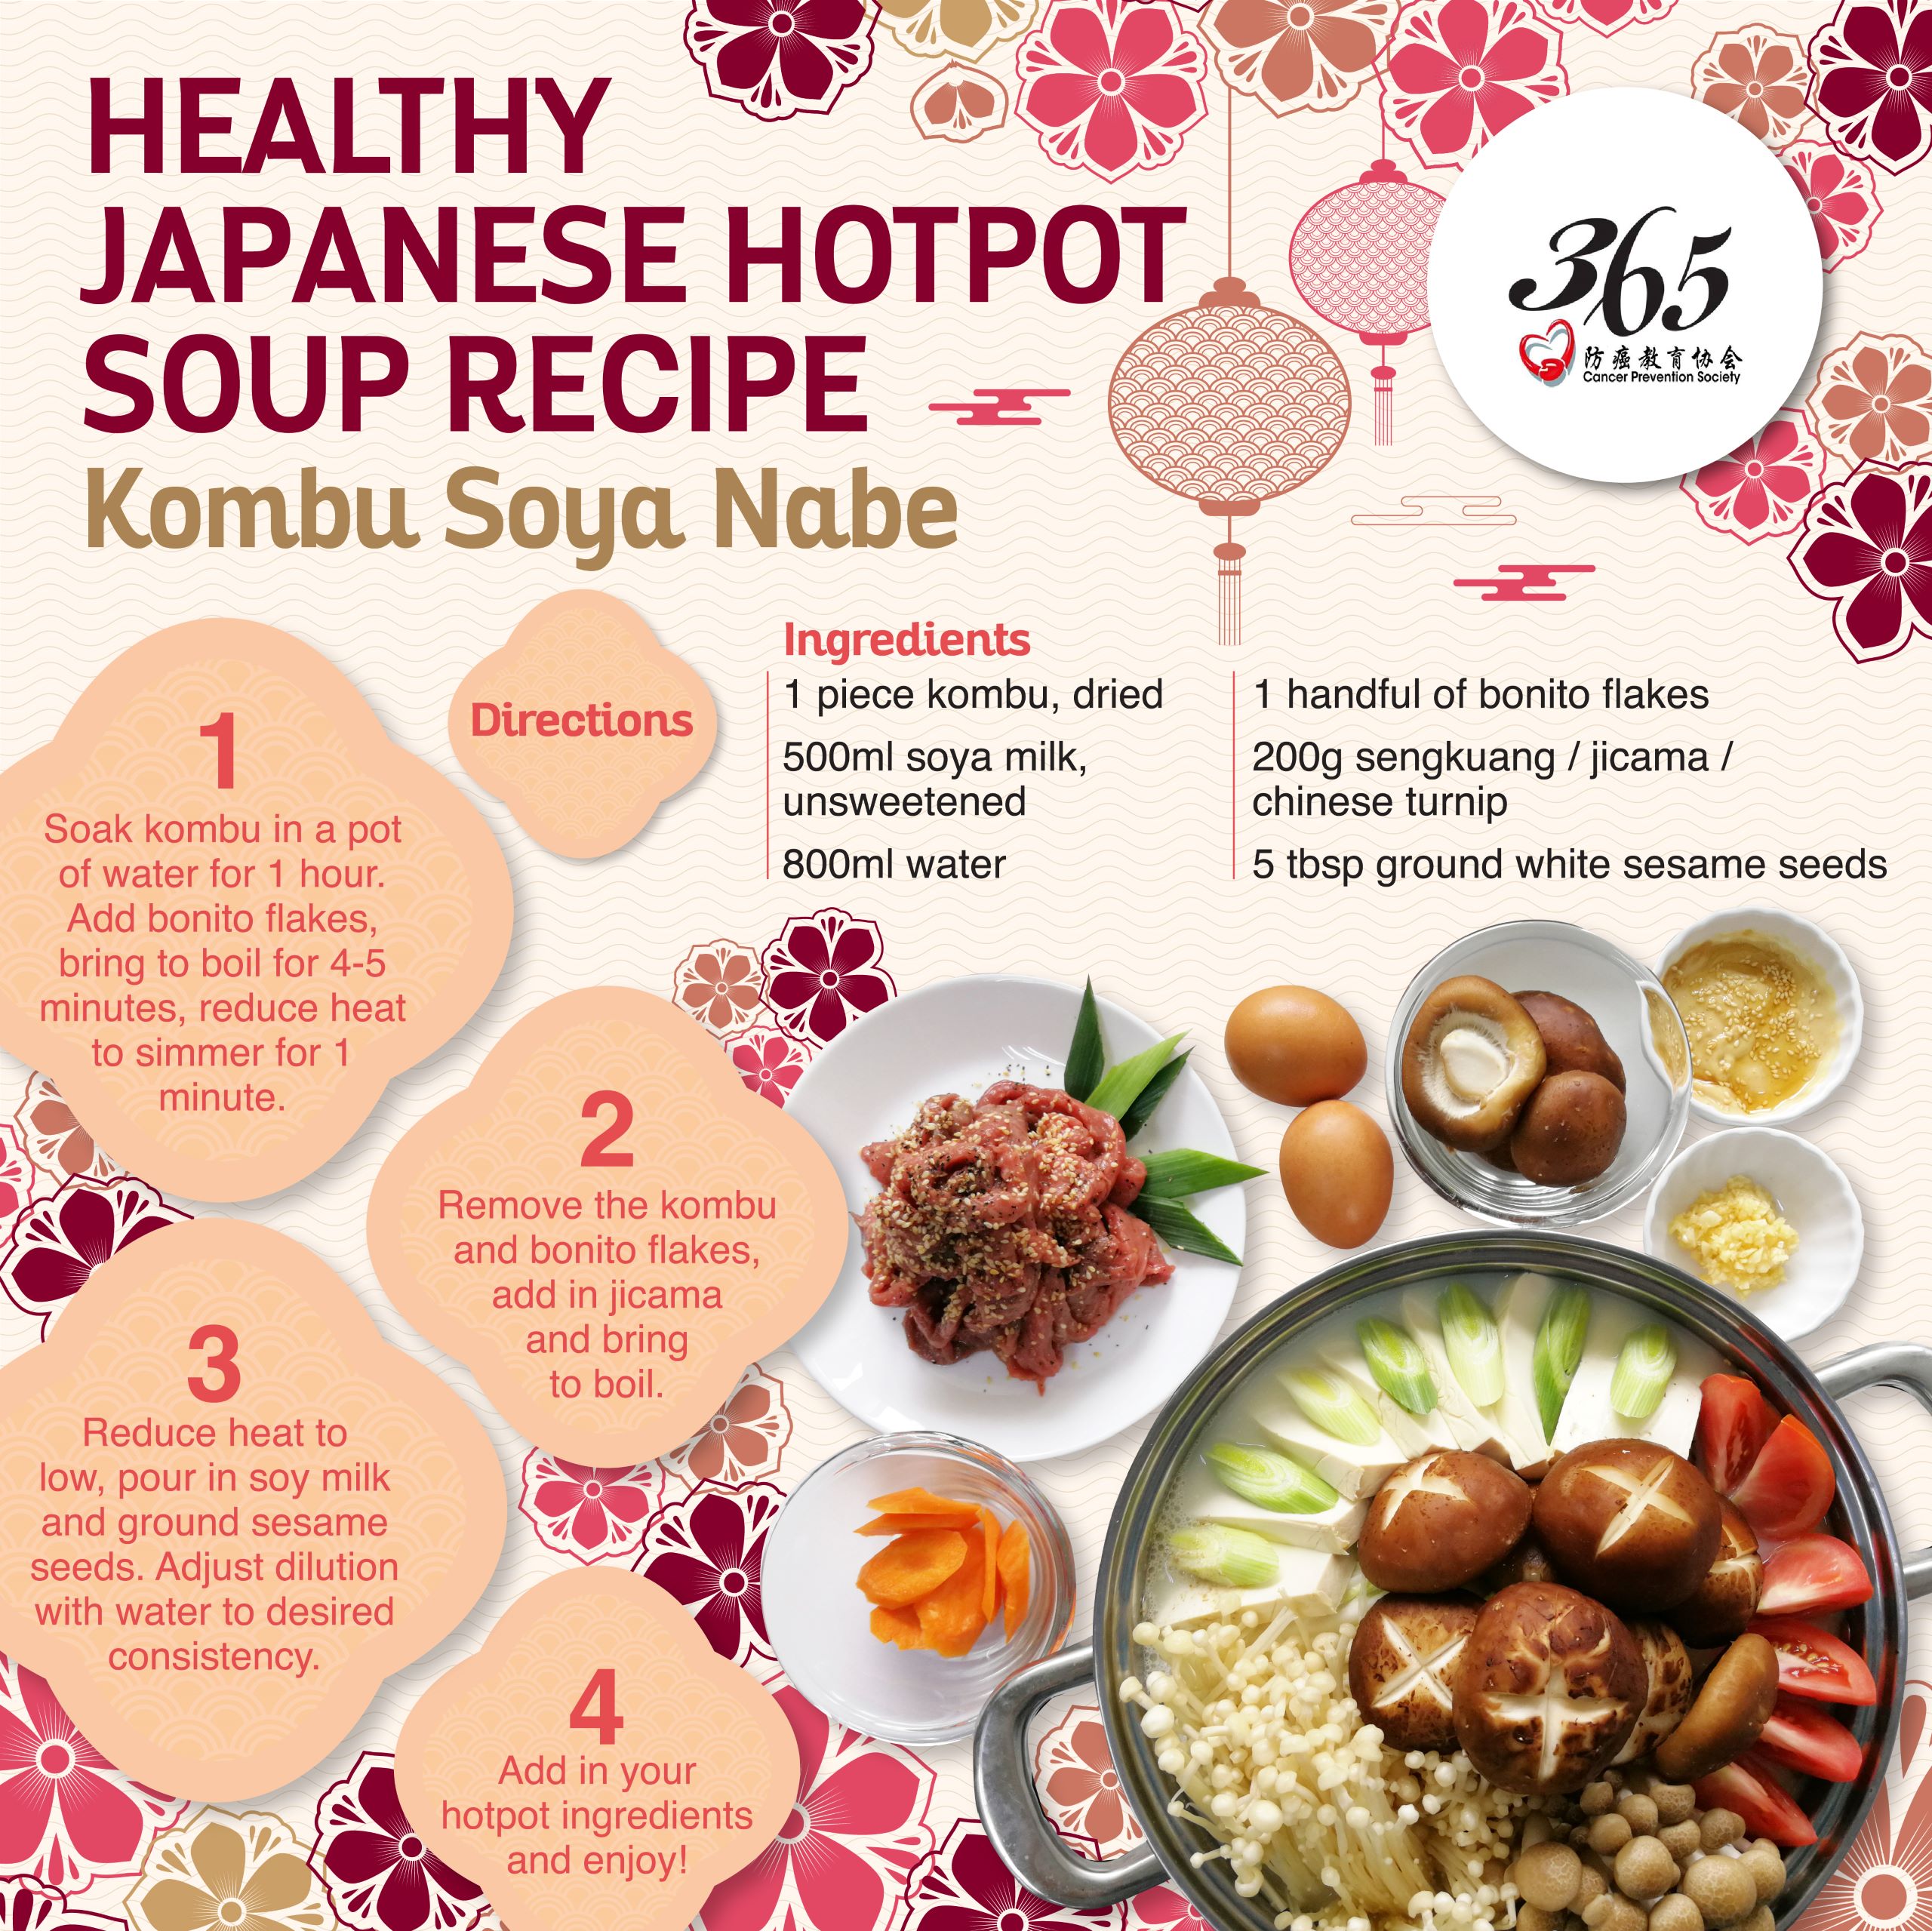 https://www.365cps.org.sg/wp-content/uploads/2022/08/Healthy-Japanese-Hotpot-Soup-Recipe.jpg